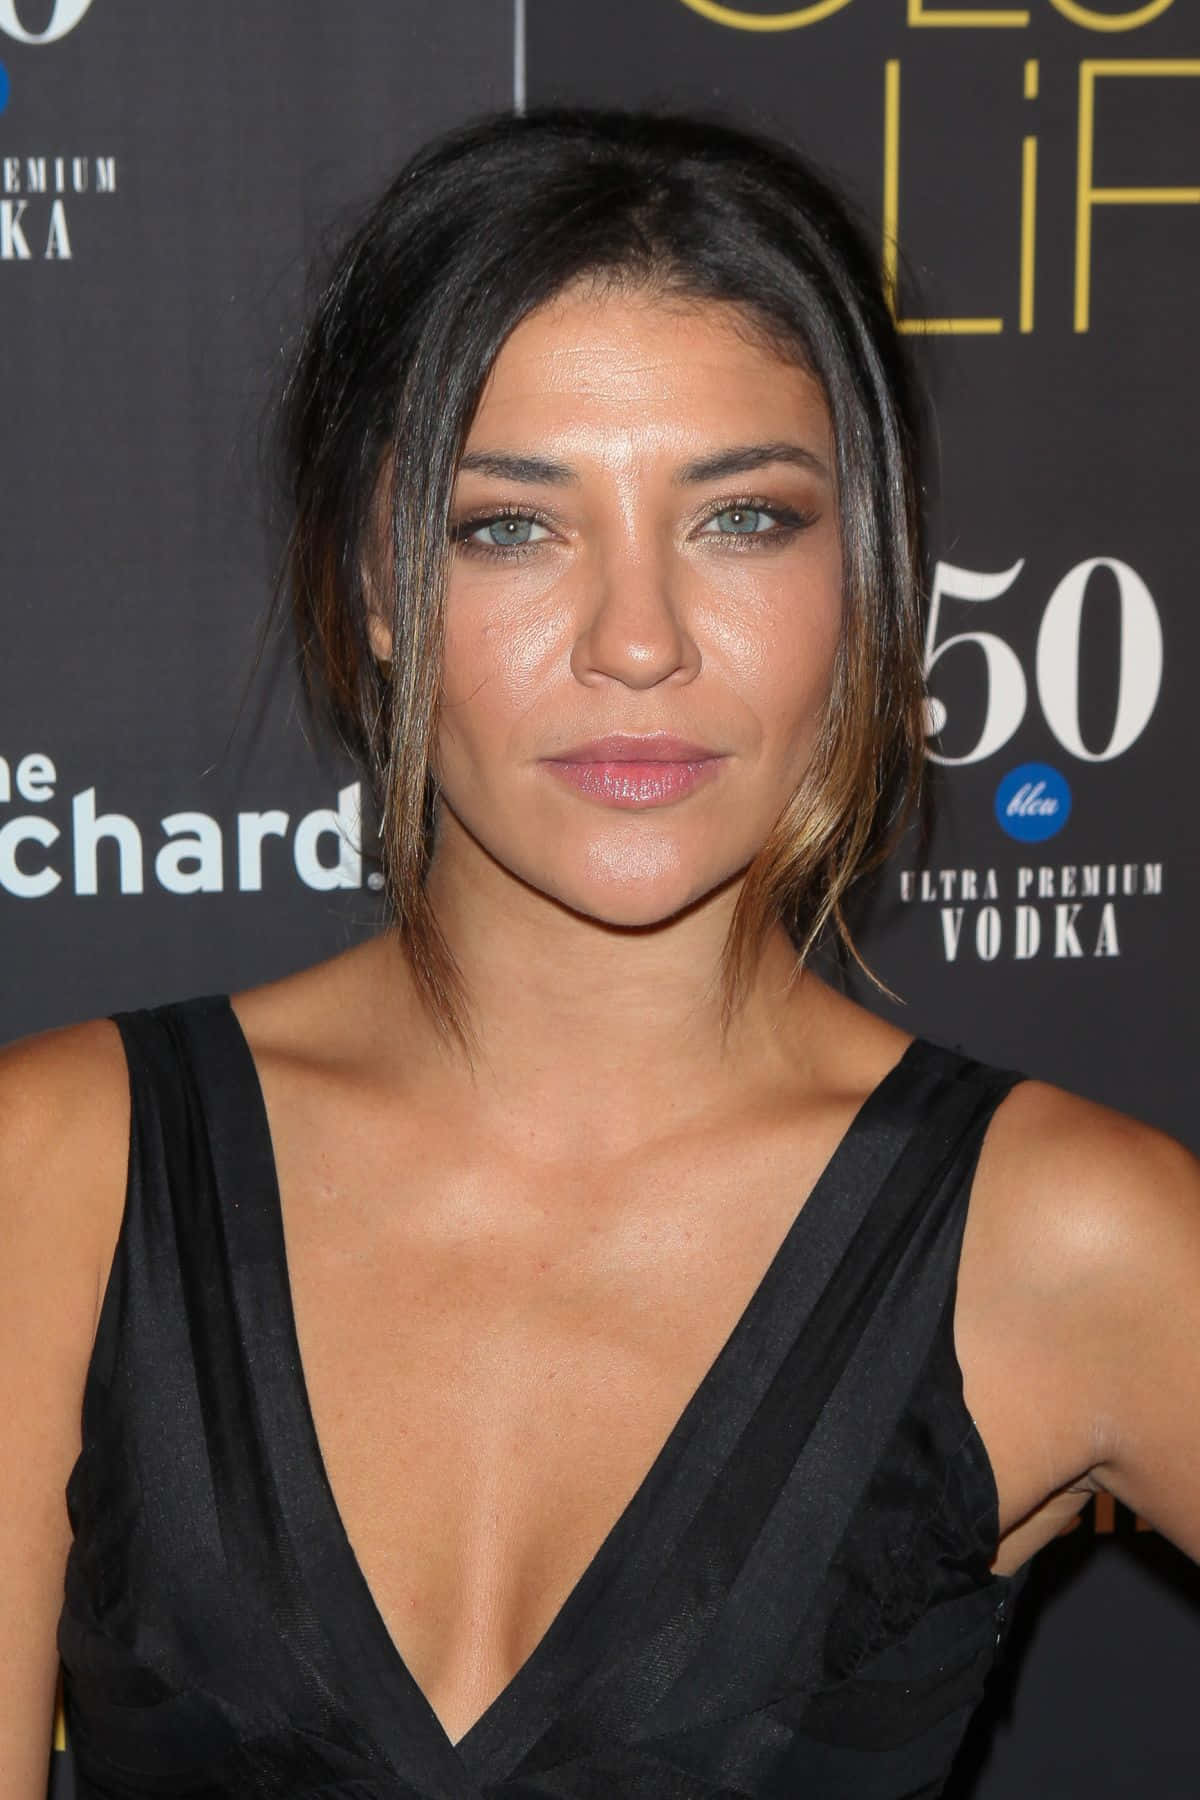 Jessica Szohr posing gracefully in a black outfit Wallpaper